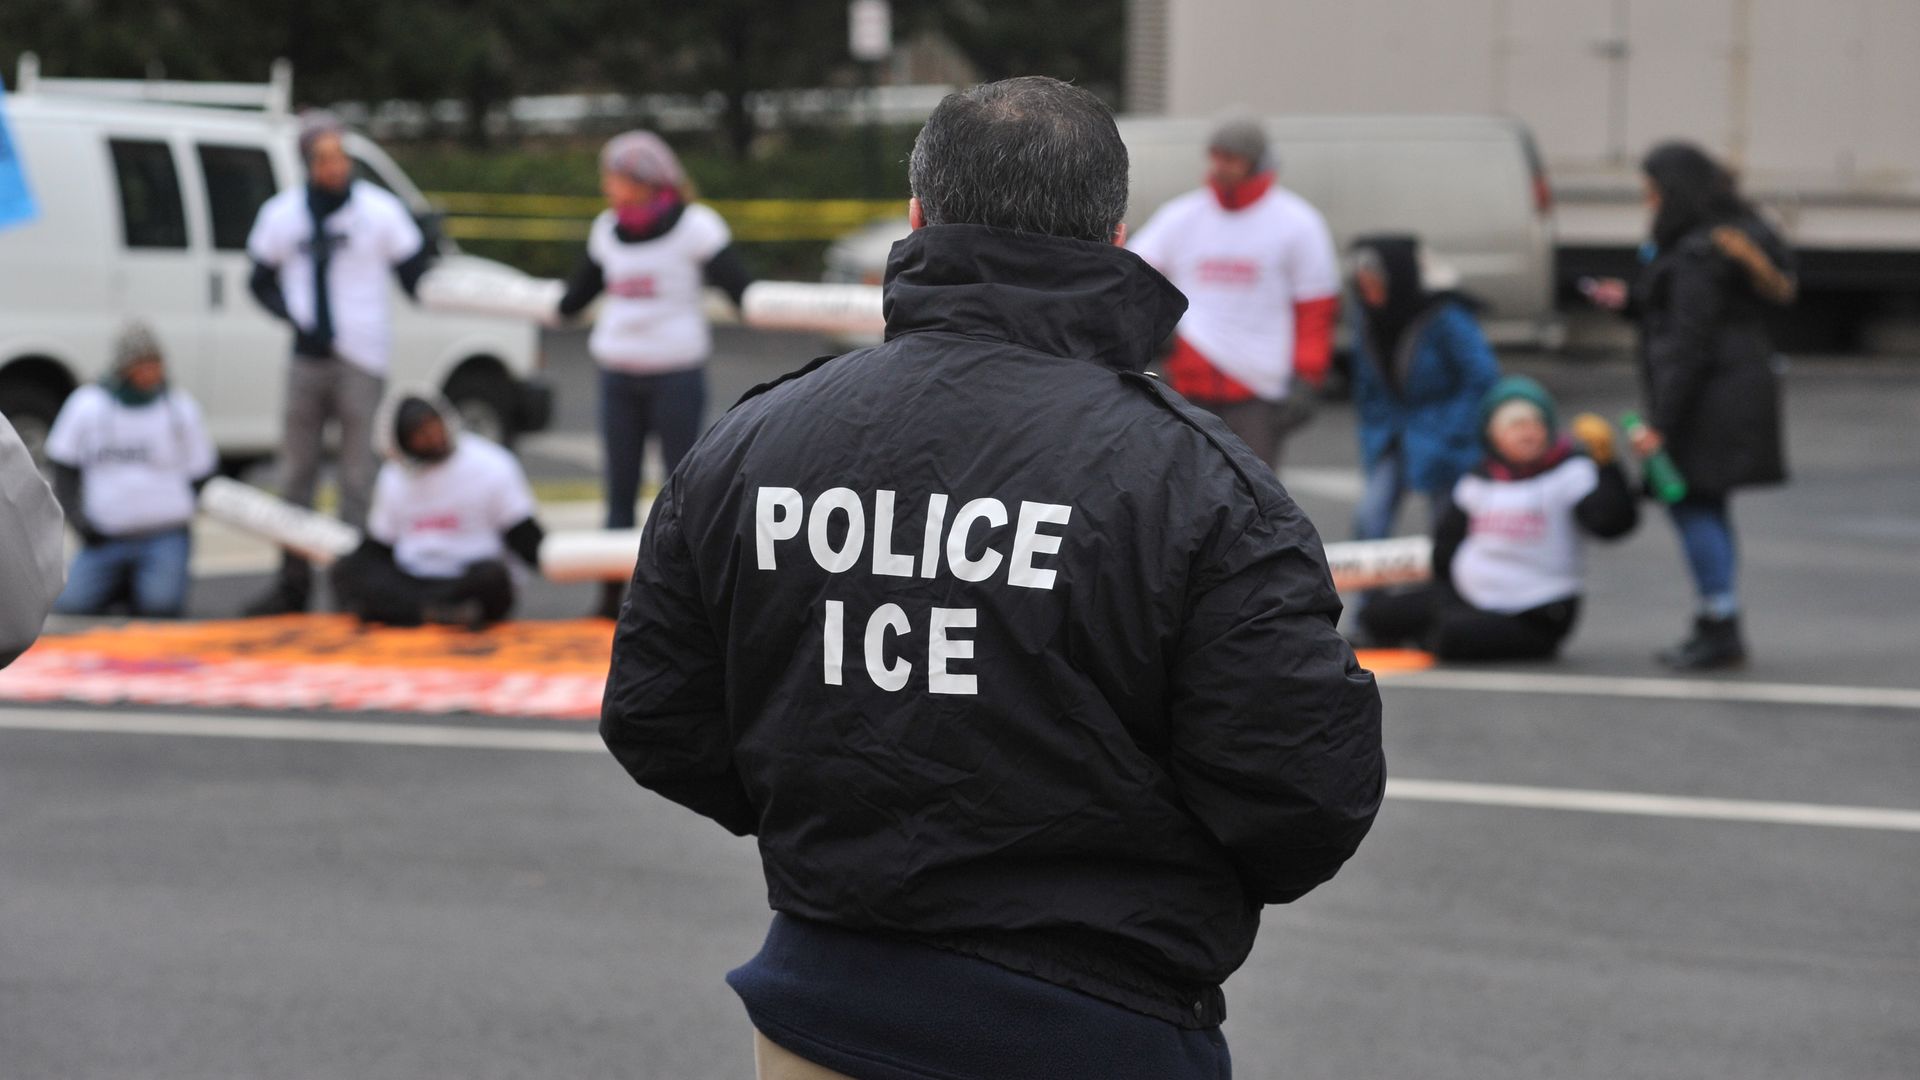 An ICE officer stands in front of protestors